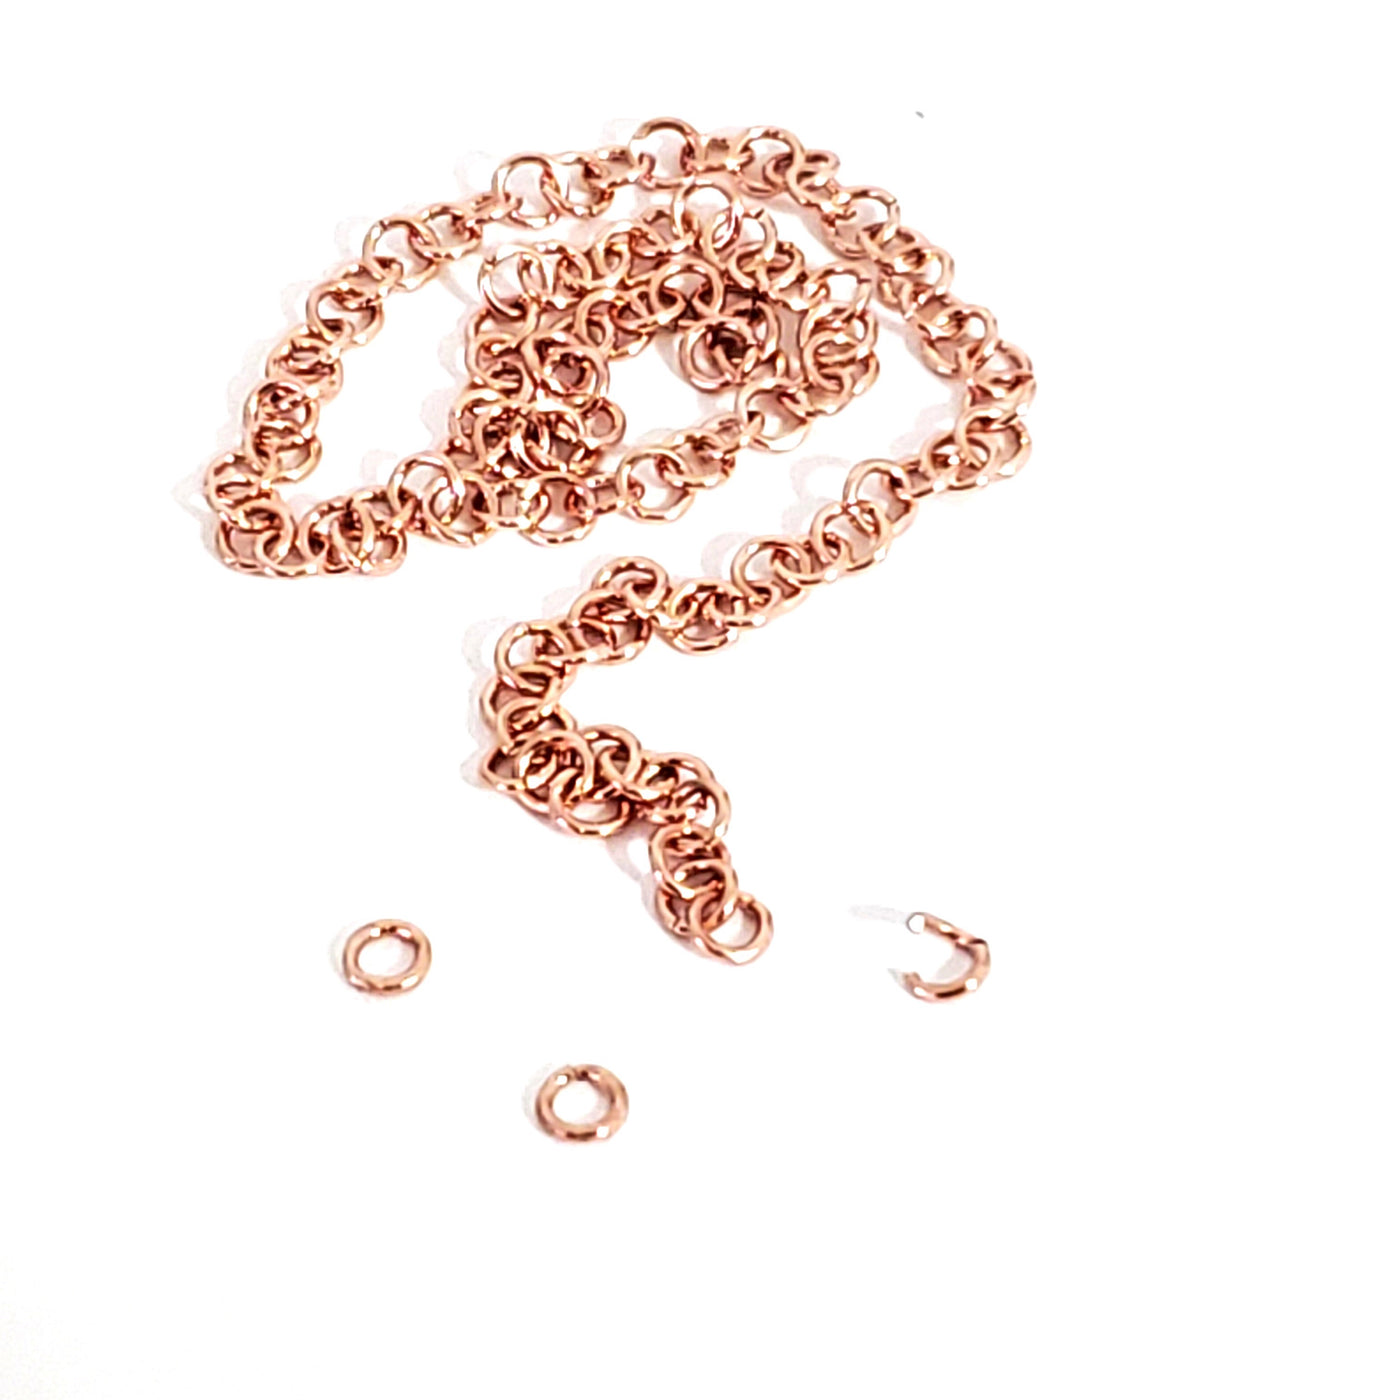 5-50 Pcs/14K Rose Gold Filled Jump Rings Jumprings, 6 Mm, 18 Gauge Ga G,  Thick Strong, Wholesale Findings Rg Fc.m Solo Jr6 - Yahoo Shopping